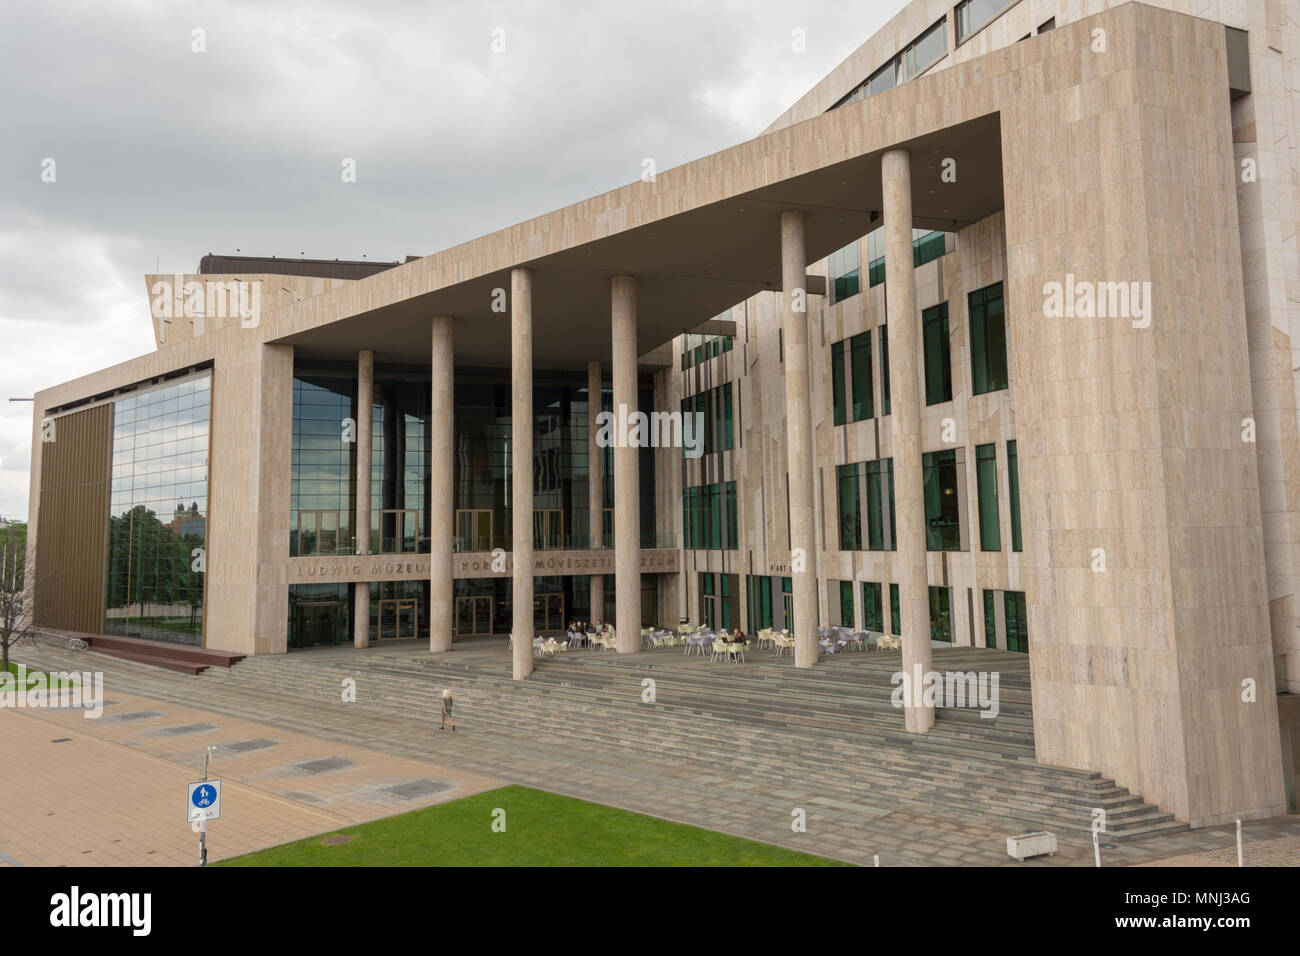 BUDAPEST, HUNGARY - MAY 27, 2017: IContemporary building Palace of Arts (MUPA). MUPA is the most popular music hall and cultural center in Budapest, o Stock Photo